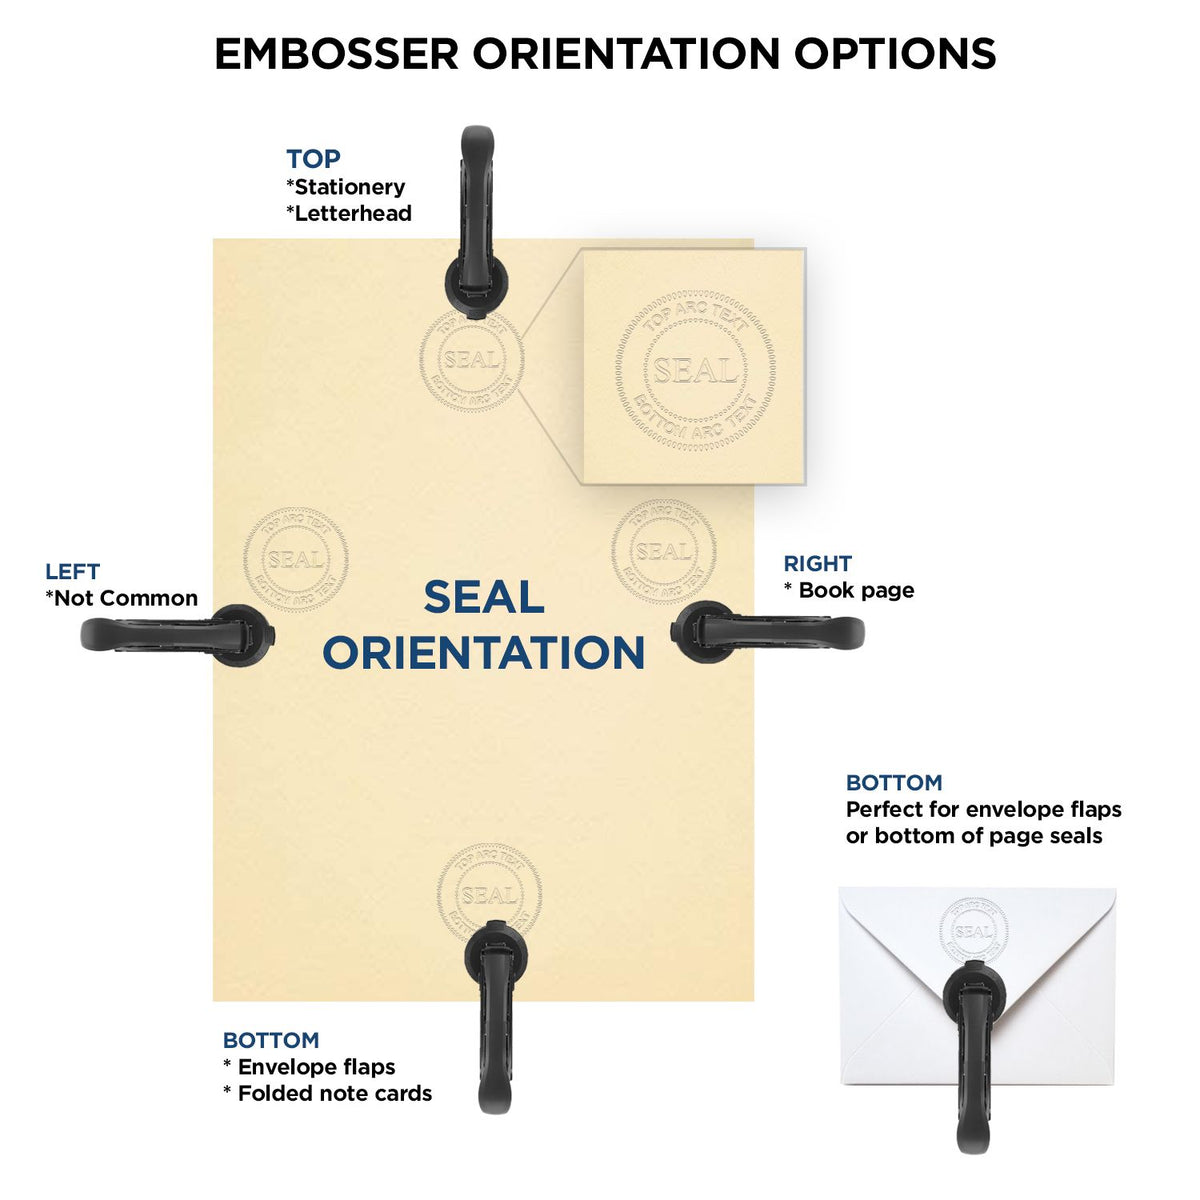 An infographic for the Hybrid South Dakota Land Surveyor Seal showing embosser orientation, this is showing examples of a top, bottom, right and left insert.